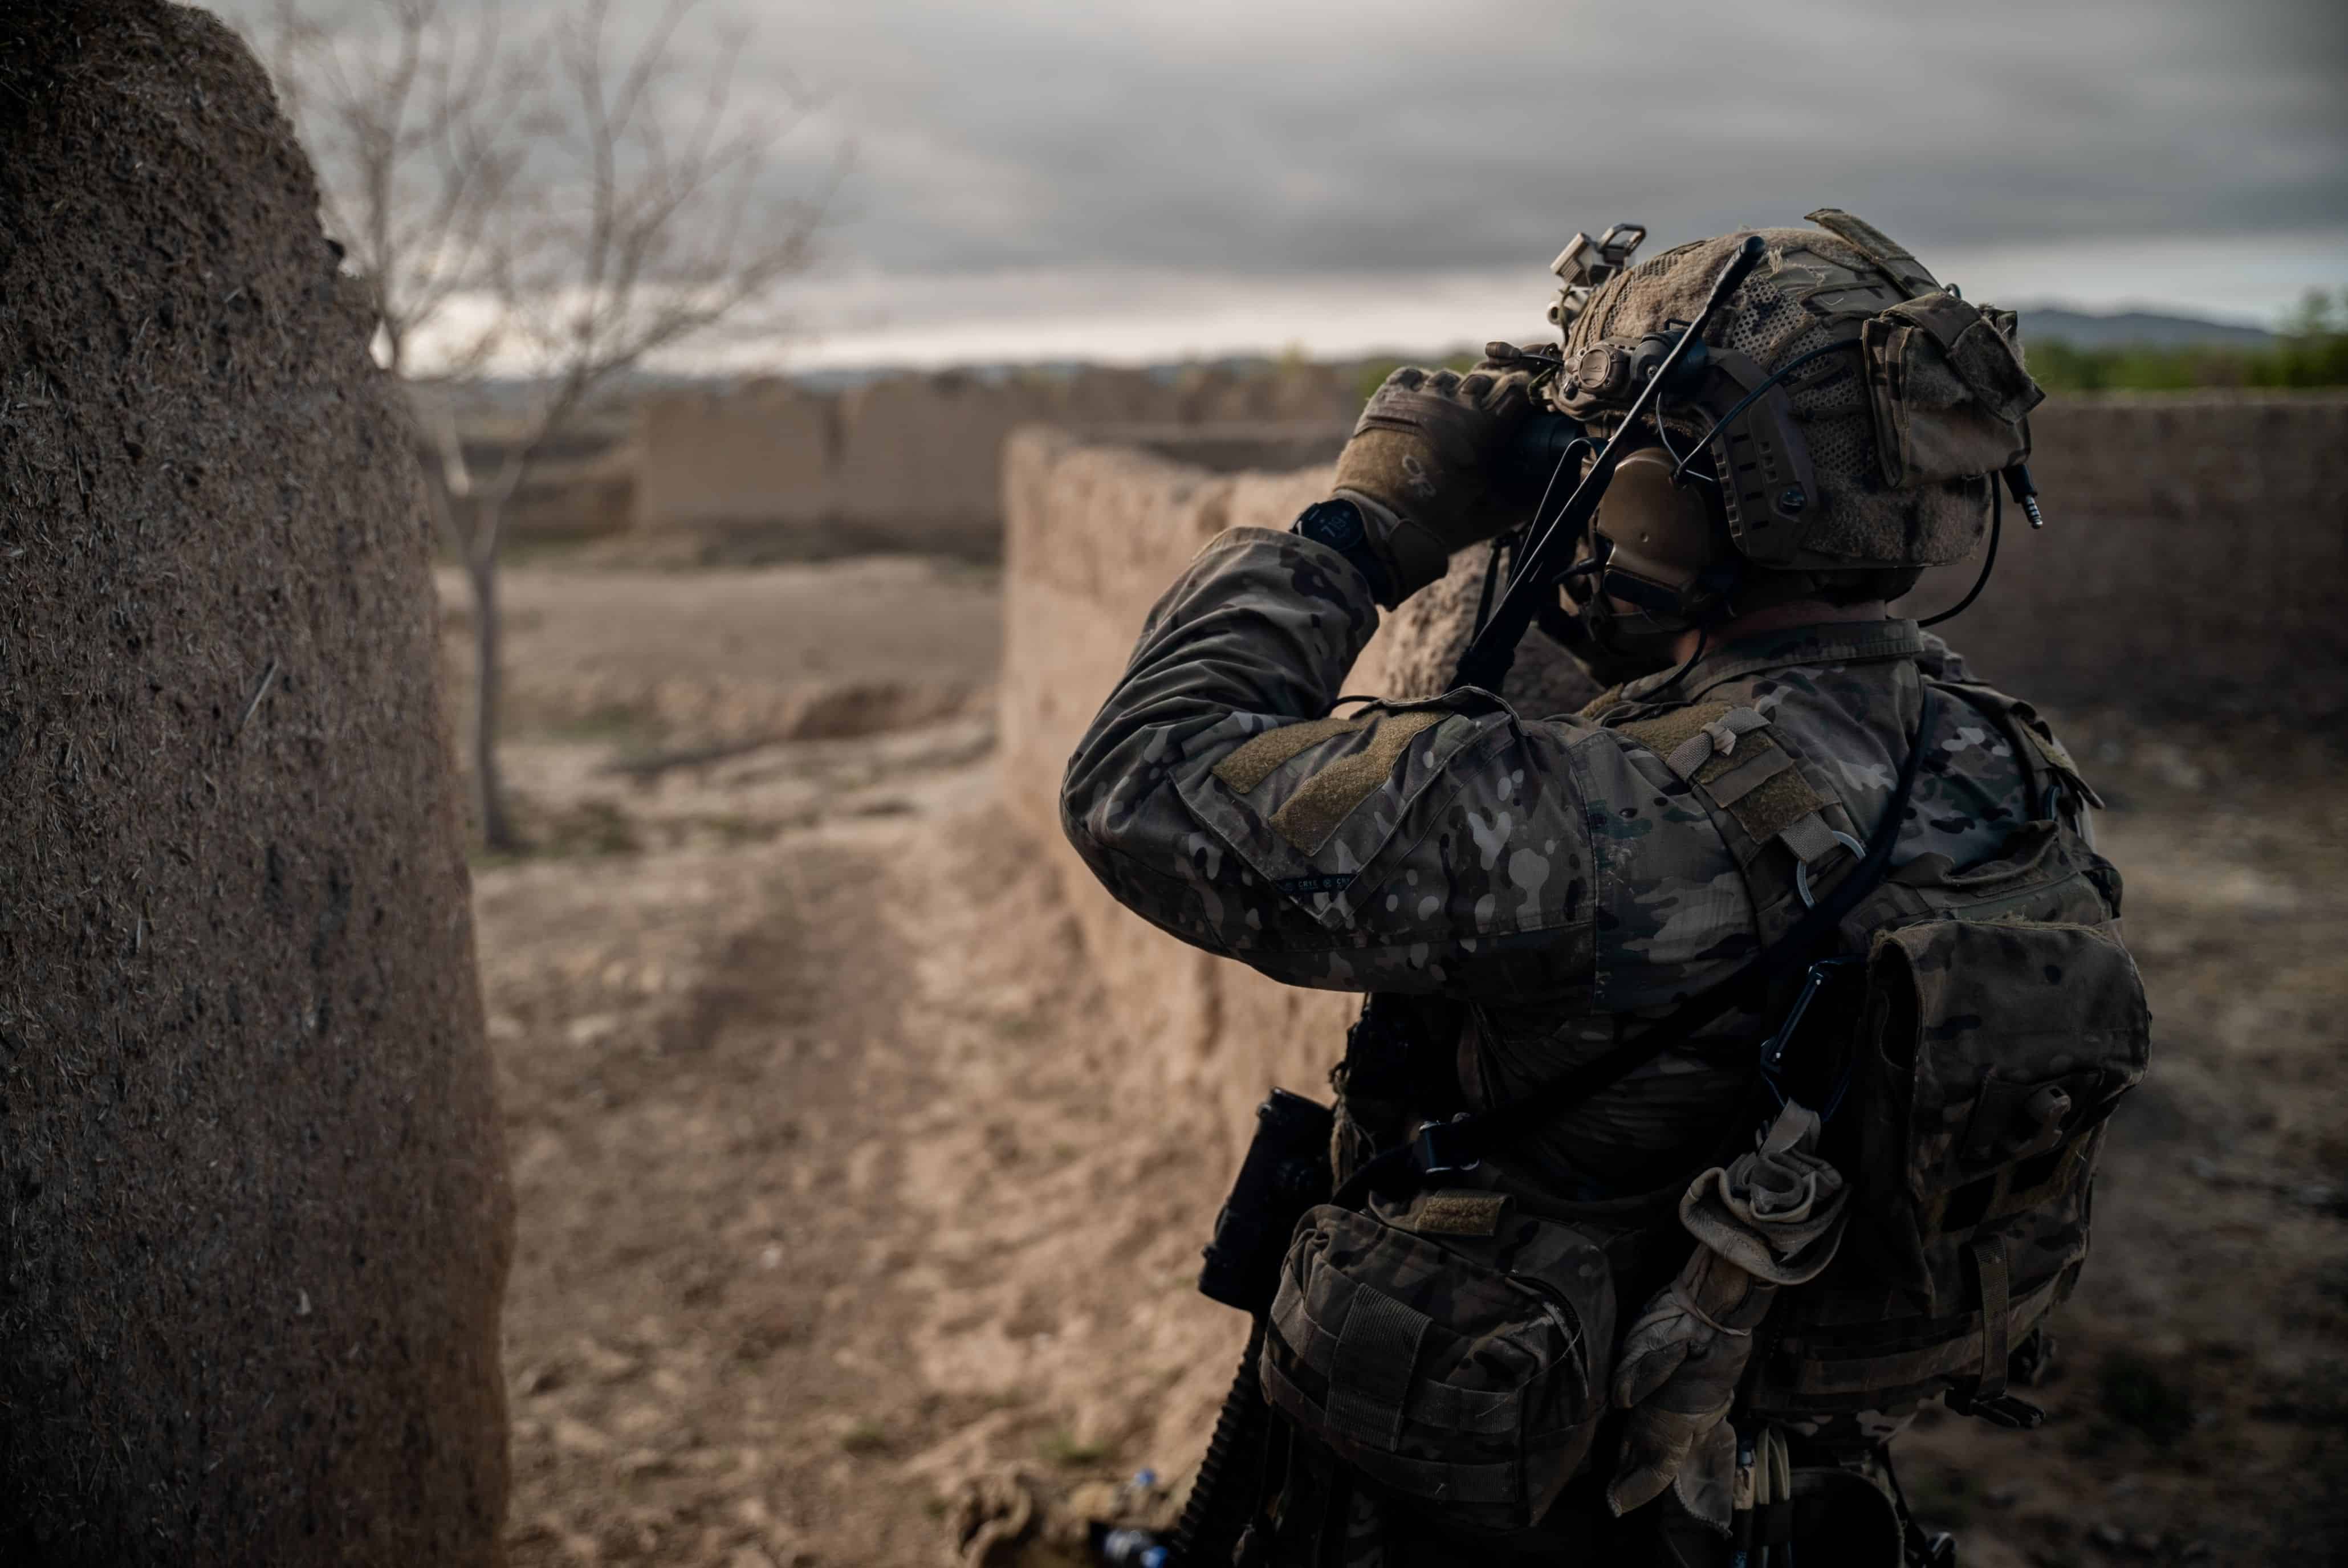 U.S. special operations service members conduct combat operations in support of Operation Resolute Support in Southeast Afghanistan, April 2019. RS is a NATO-led mission to train, advise, and assist the Afghan National Defense and Security Forces and institutions. (U.S. Army photo by Sgt. Jaerett Engeseth)